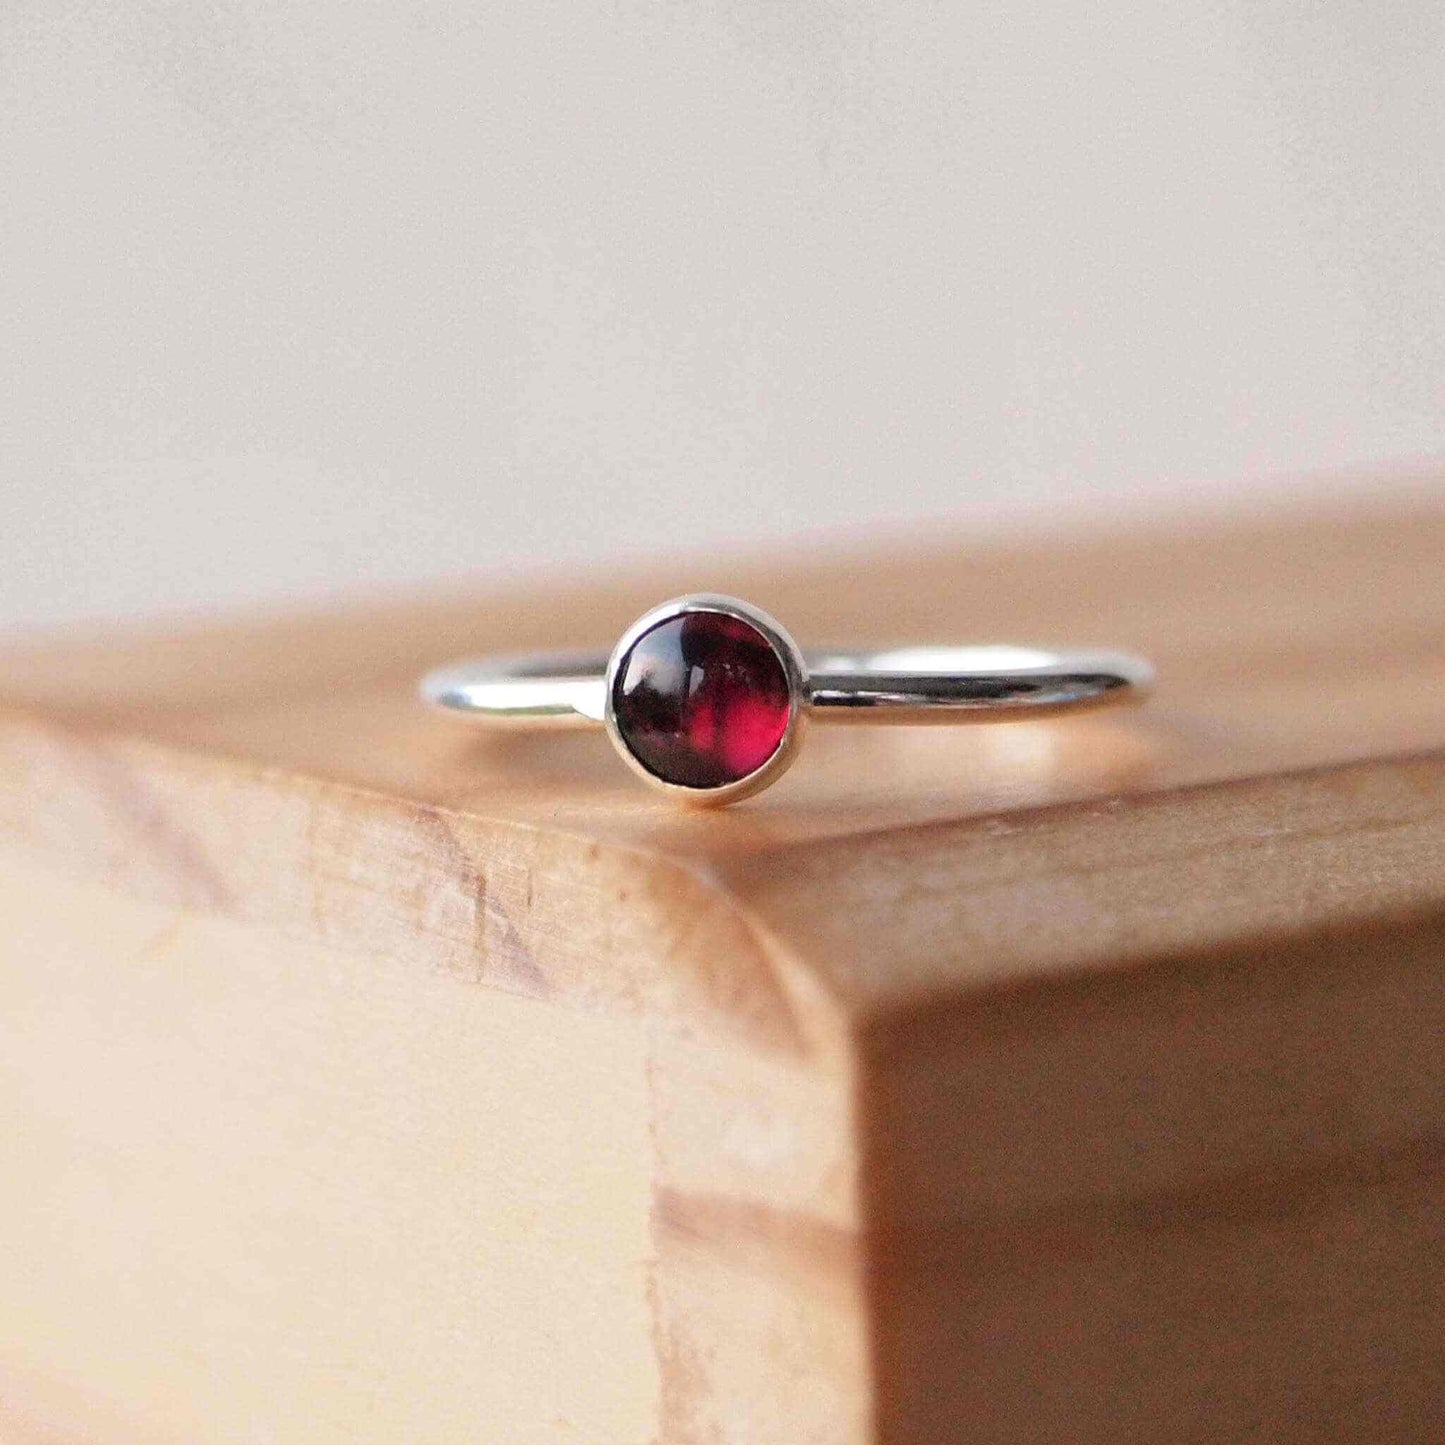 Simple Silver and Garnet ring with a round 5mm deep red Garnet, January Birthstone. Handmade by Maram Jewellery in Scotland